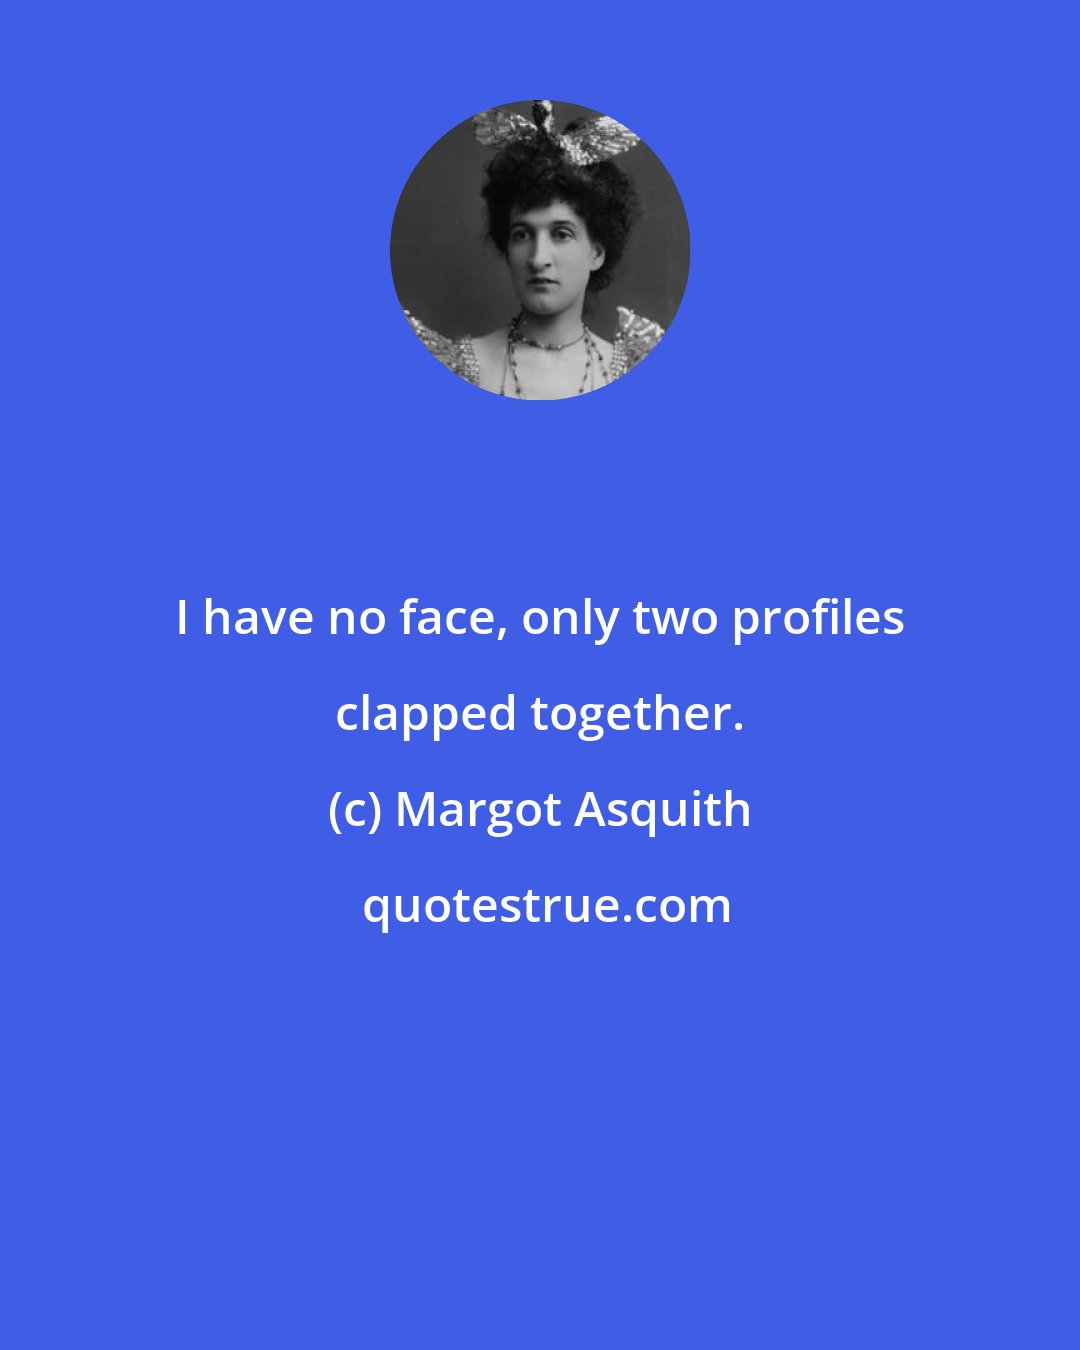 Margot Asquith: I have no face, only two profiles clapped together.